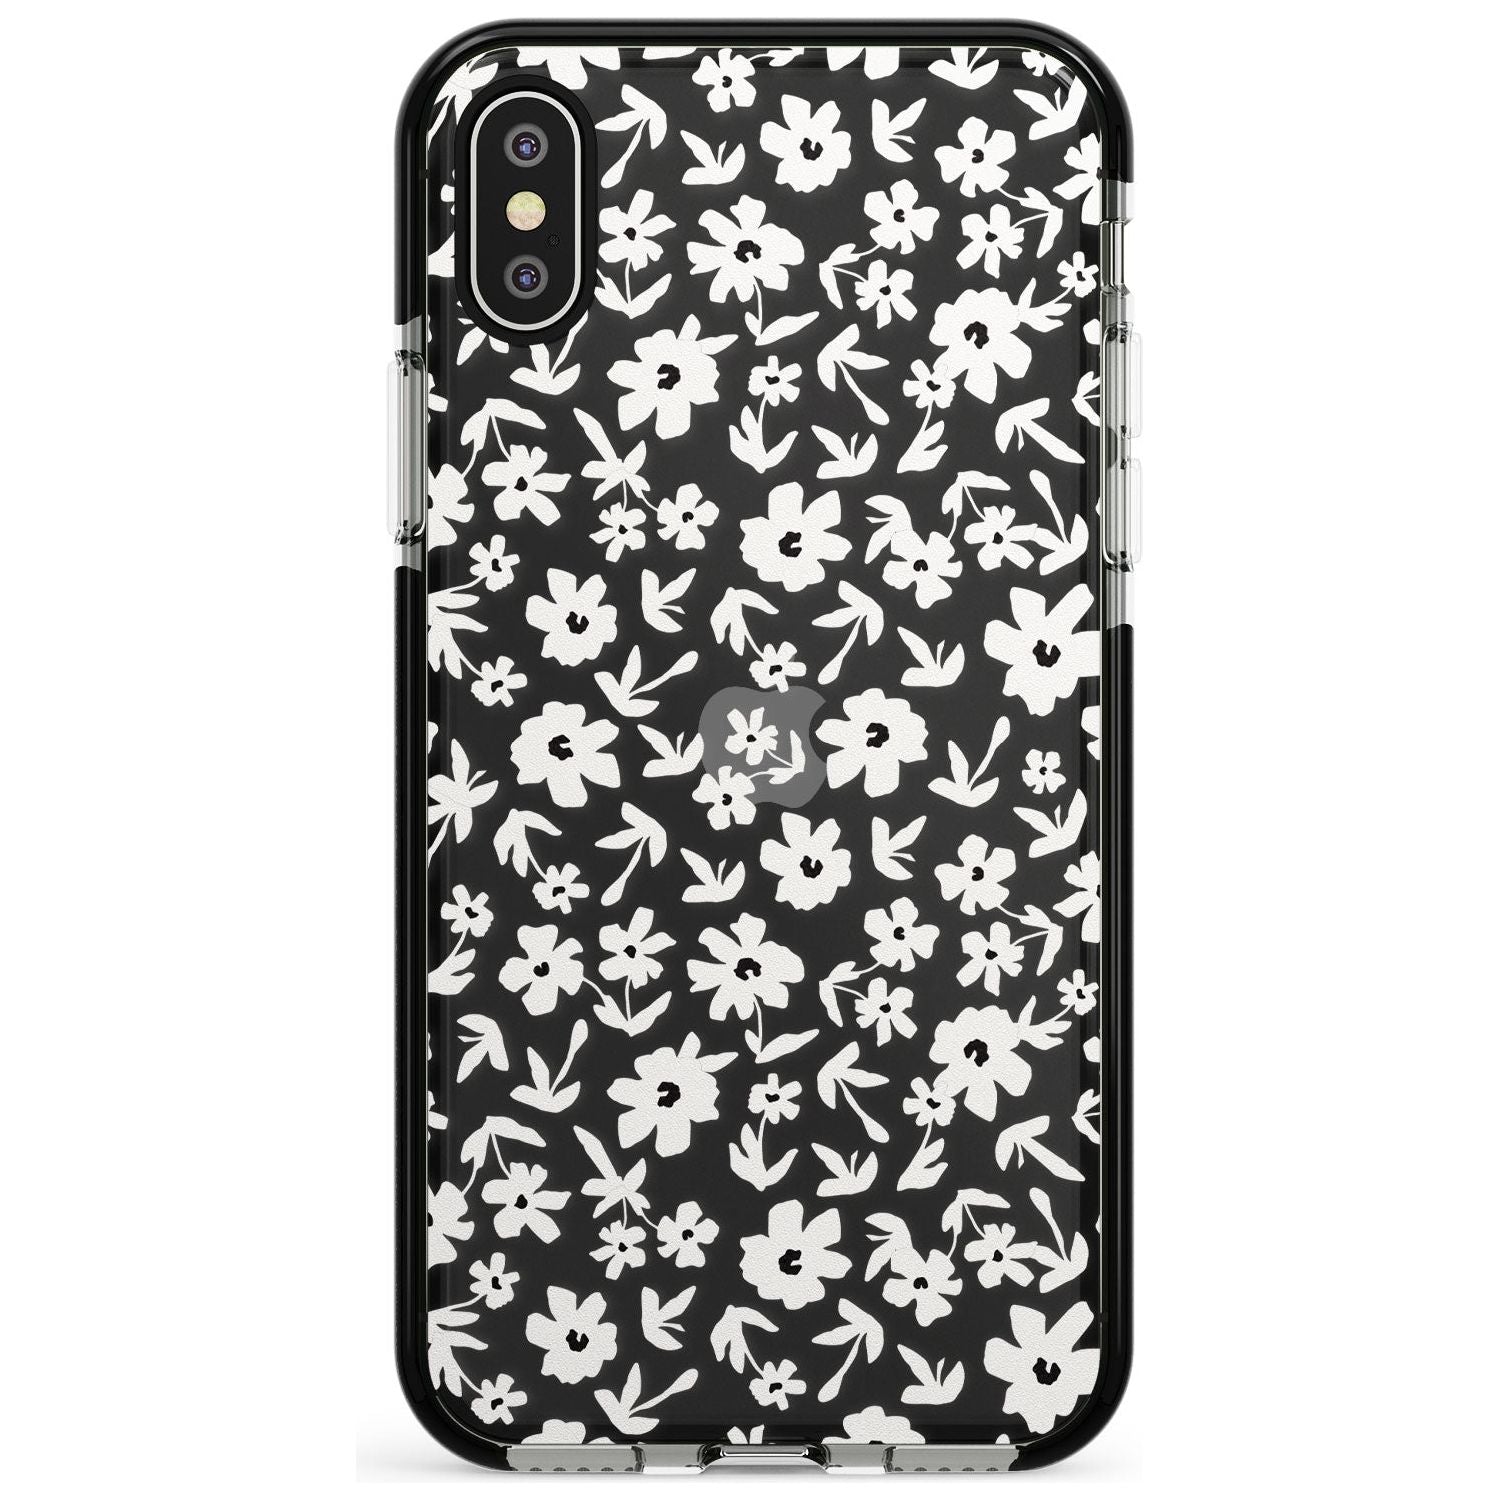 Floral Print on Clear - Cute Floral Design Pink Fade Impact Phone Case for iPhone X XS Max XR